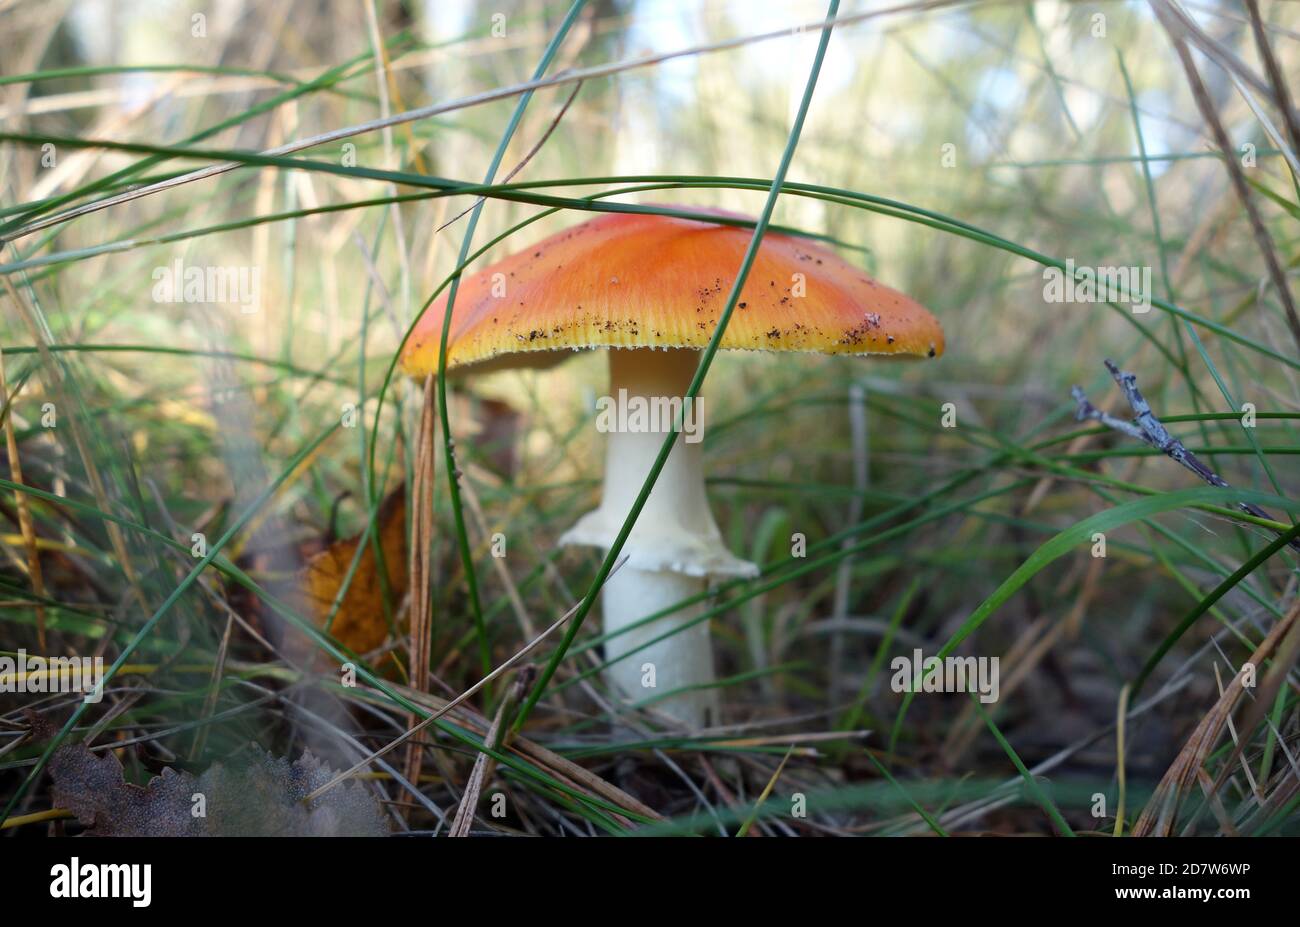 A orange colored fly agaric in the forest without white dots. Toxic mushroom. Toadstool in the wood surrounded by grass. Stock Photo